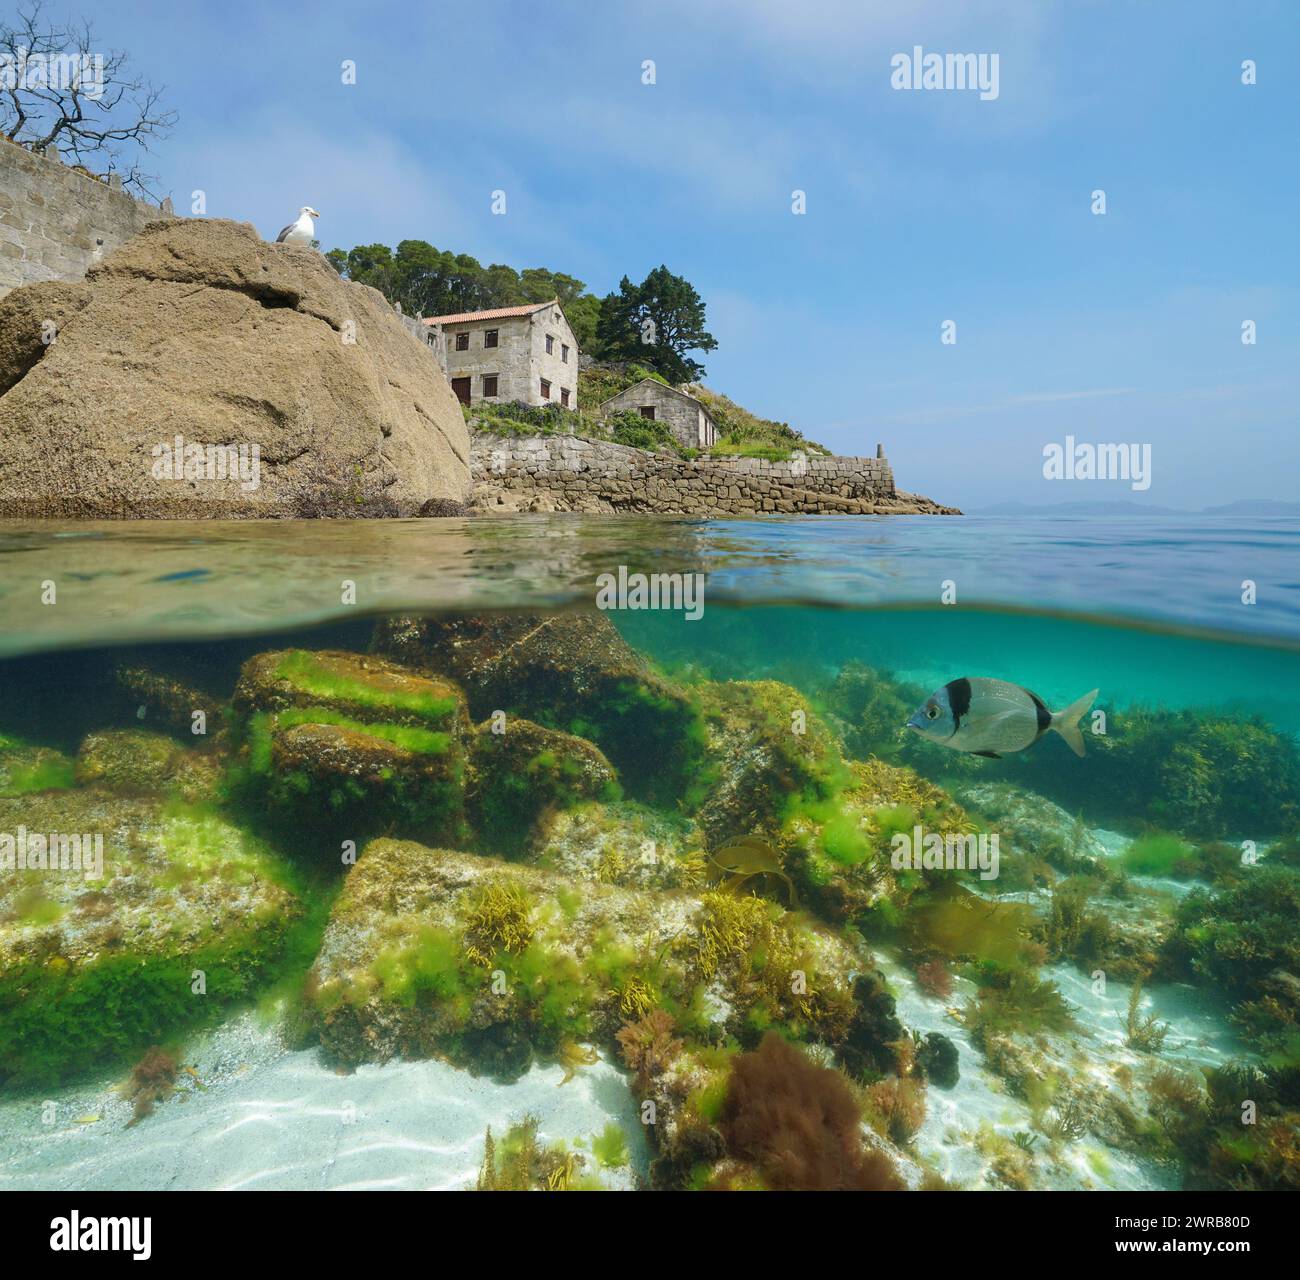 Coastline with old house on the shore of the Atlantic ocean in Spain, split view half over and under water surface, natural scene, Galicia Stock Photo